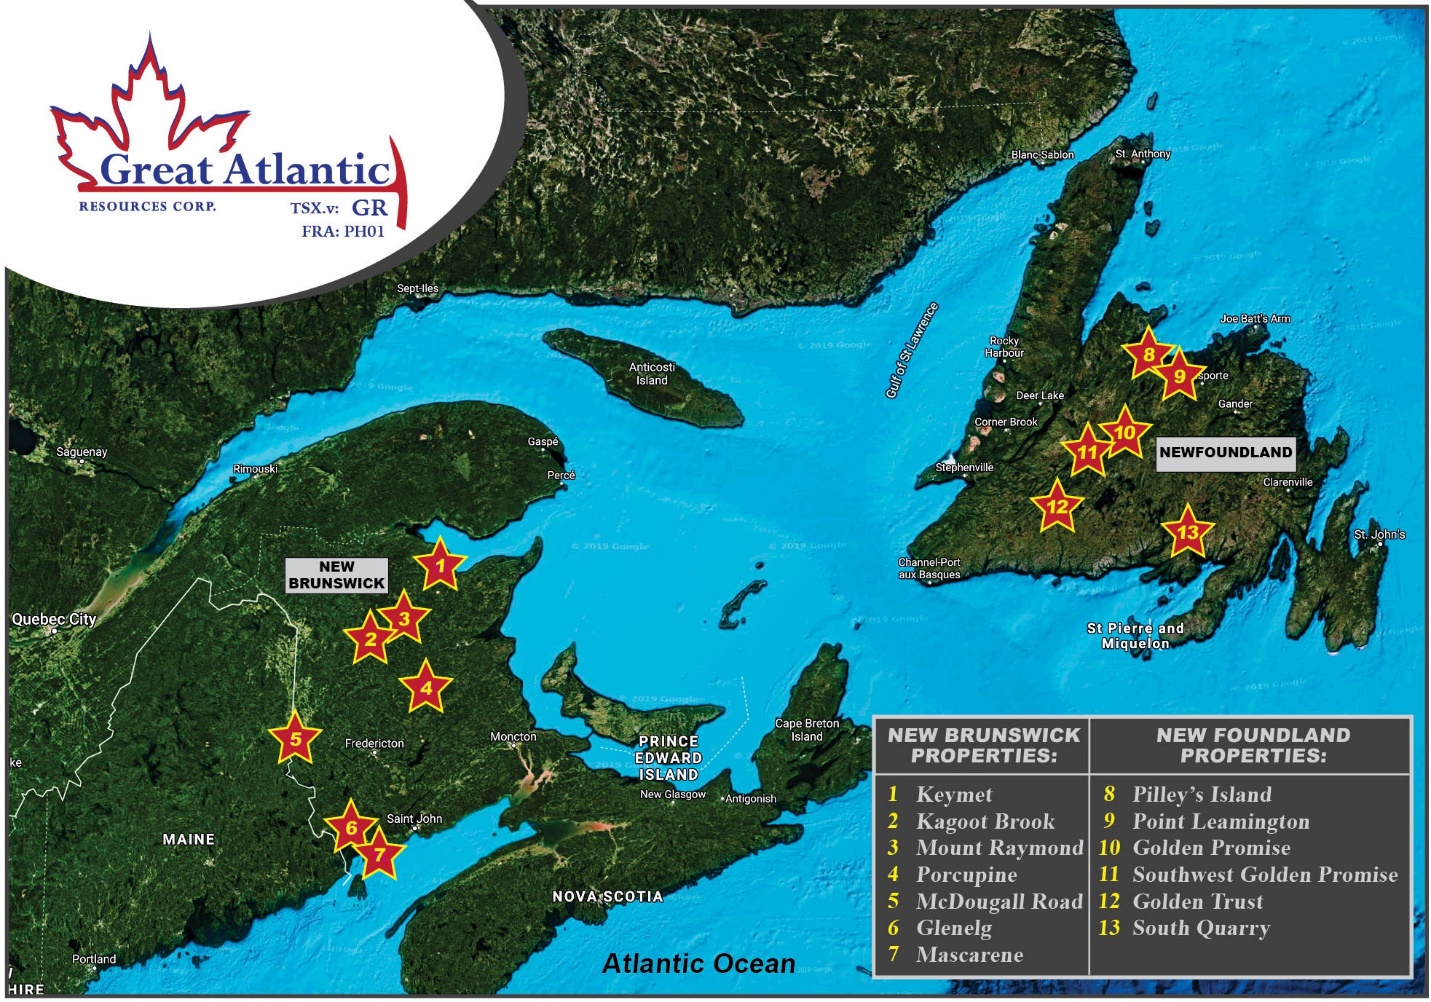 Great Atlantic Resources Corp., Wednesday, March 10, 2021, Press release picture